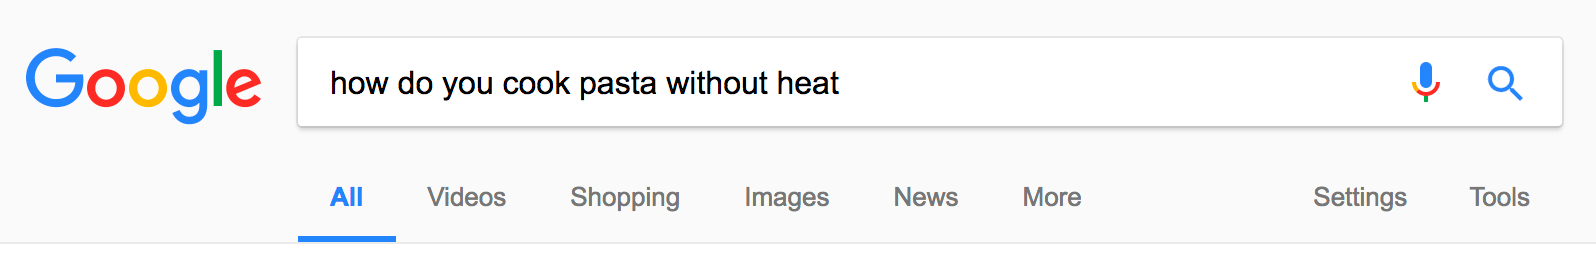 Google search example for a voice search like "How do you cook pasta without heat"